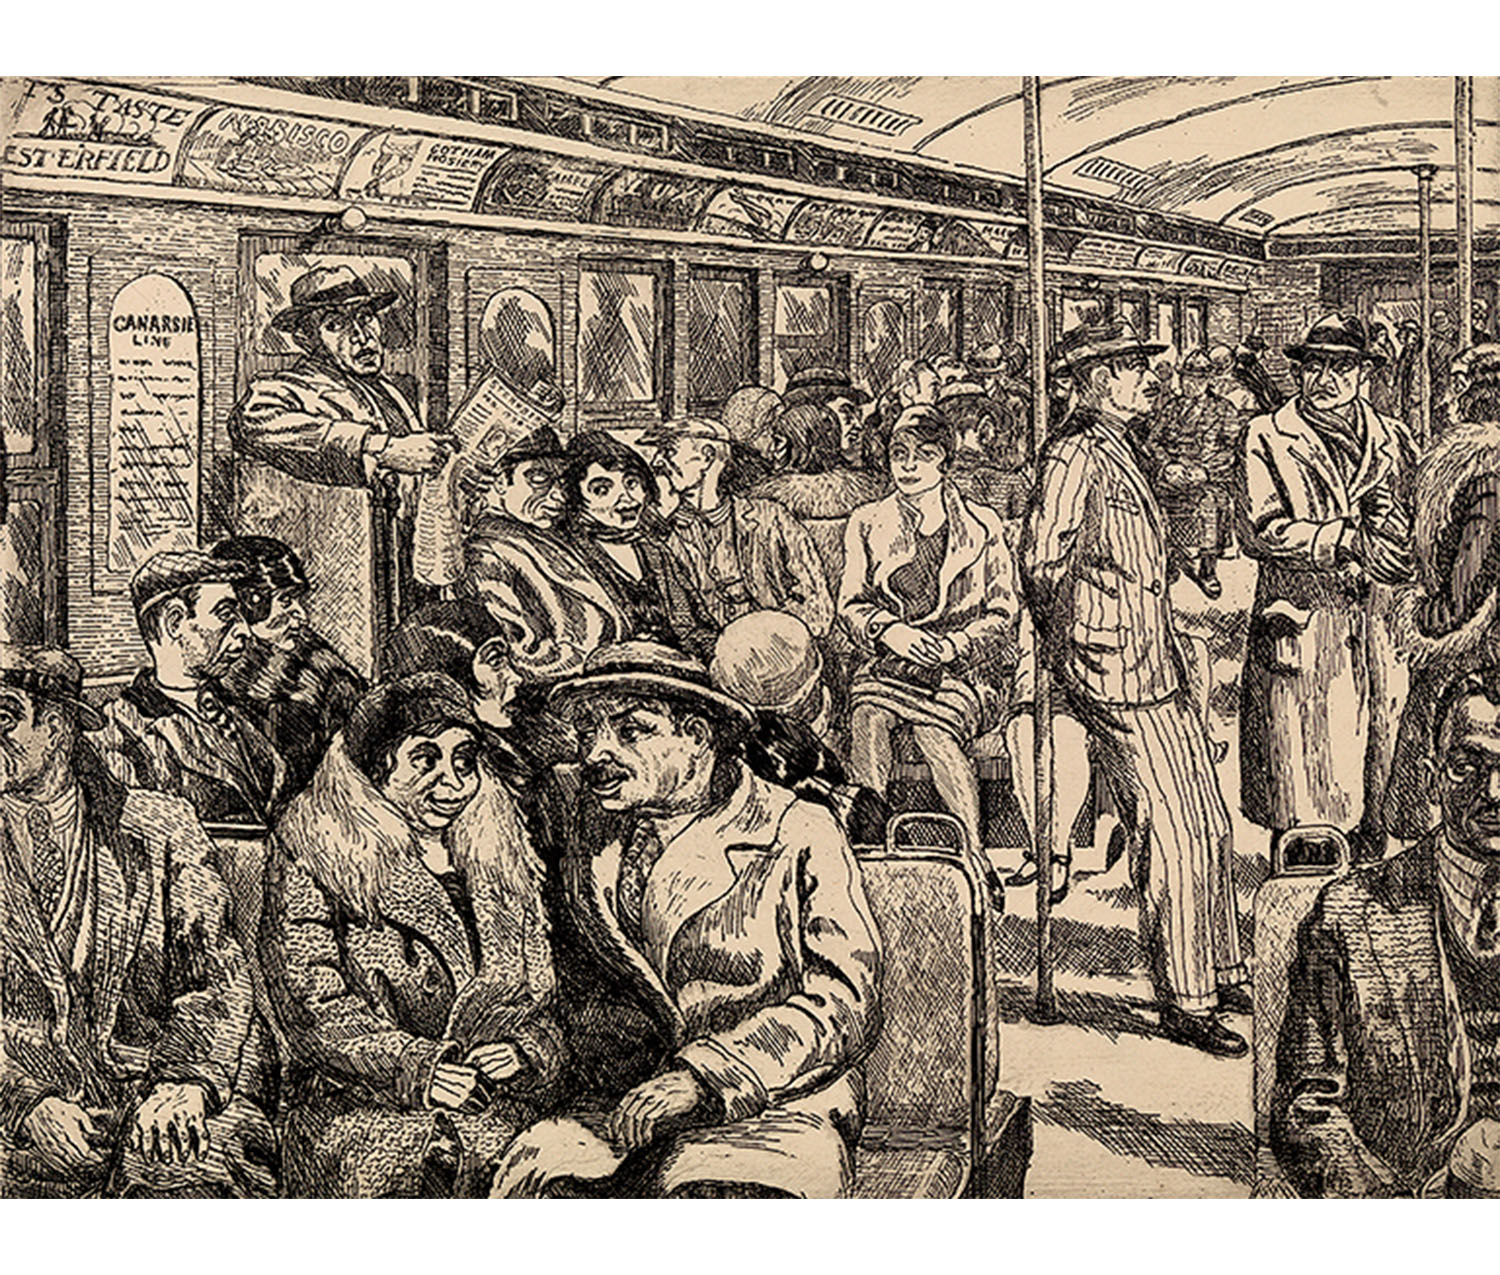 A scene in a subway car. A couple chats in the foreground. The car is packed, and everyone else is looking around in all directions. A couple of shady-looking men look askance.